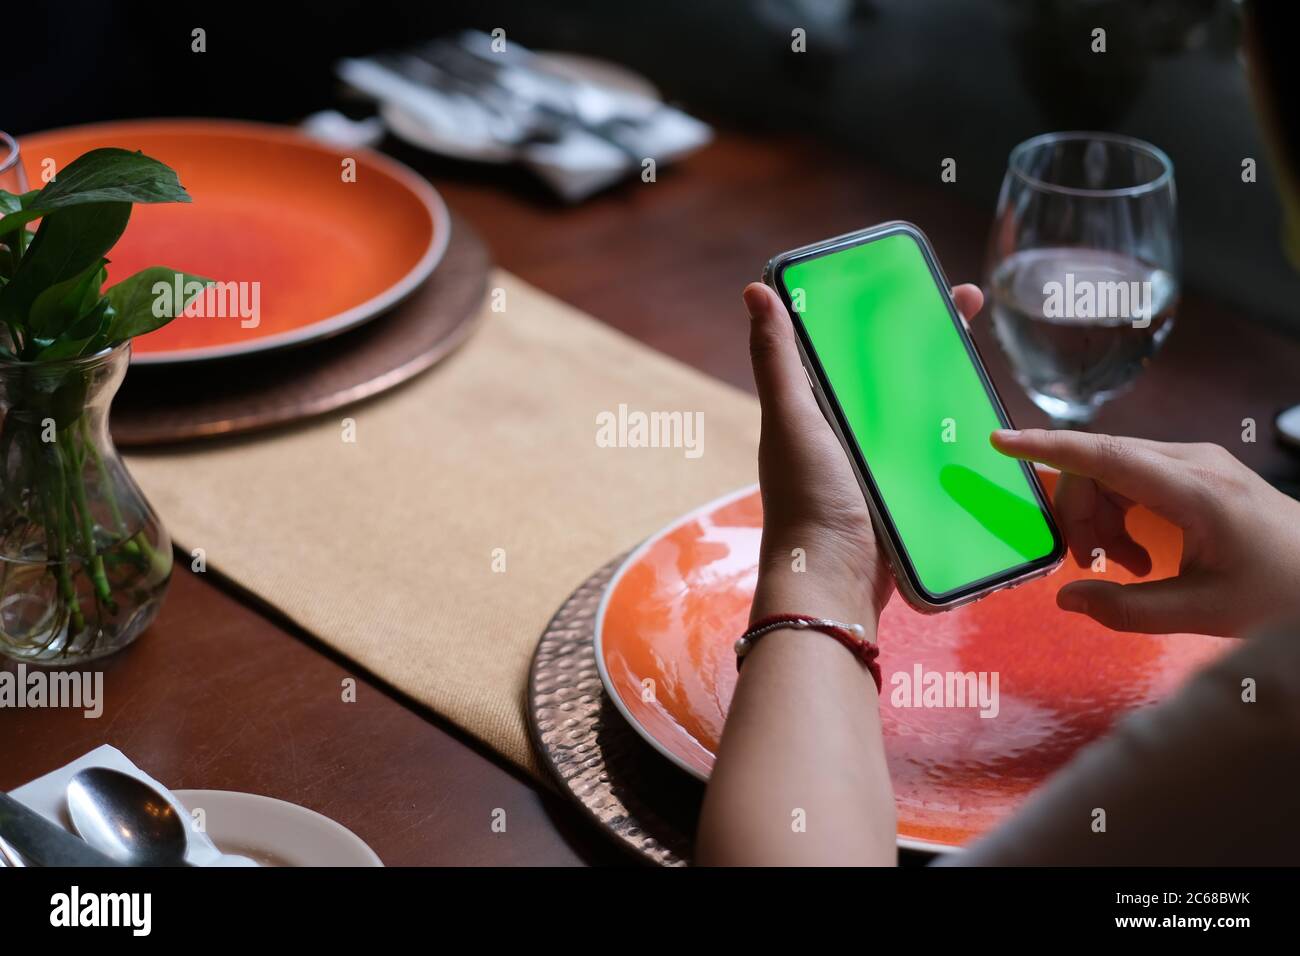 over shoulder of people tapping green screen smartphone in restaurant. blurred plates and drinking glass on table. Stock Photo